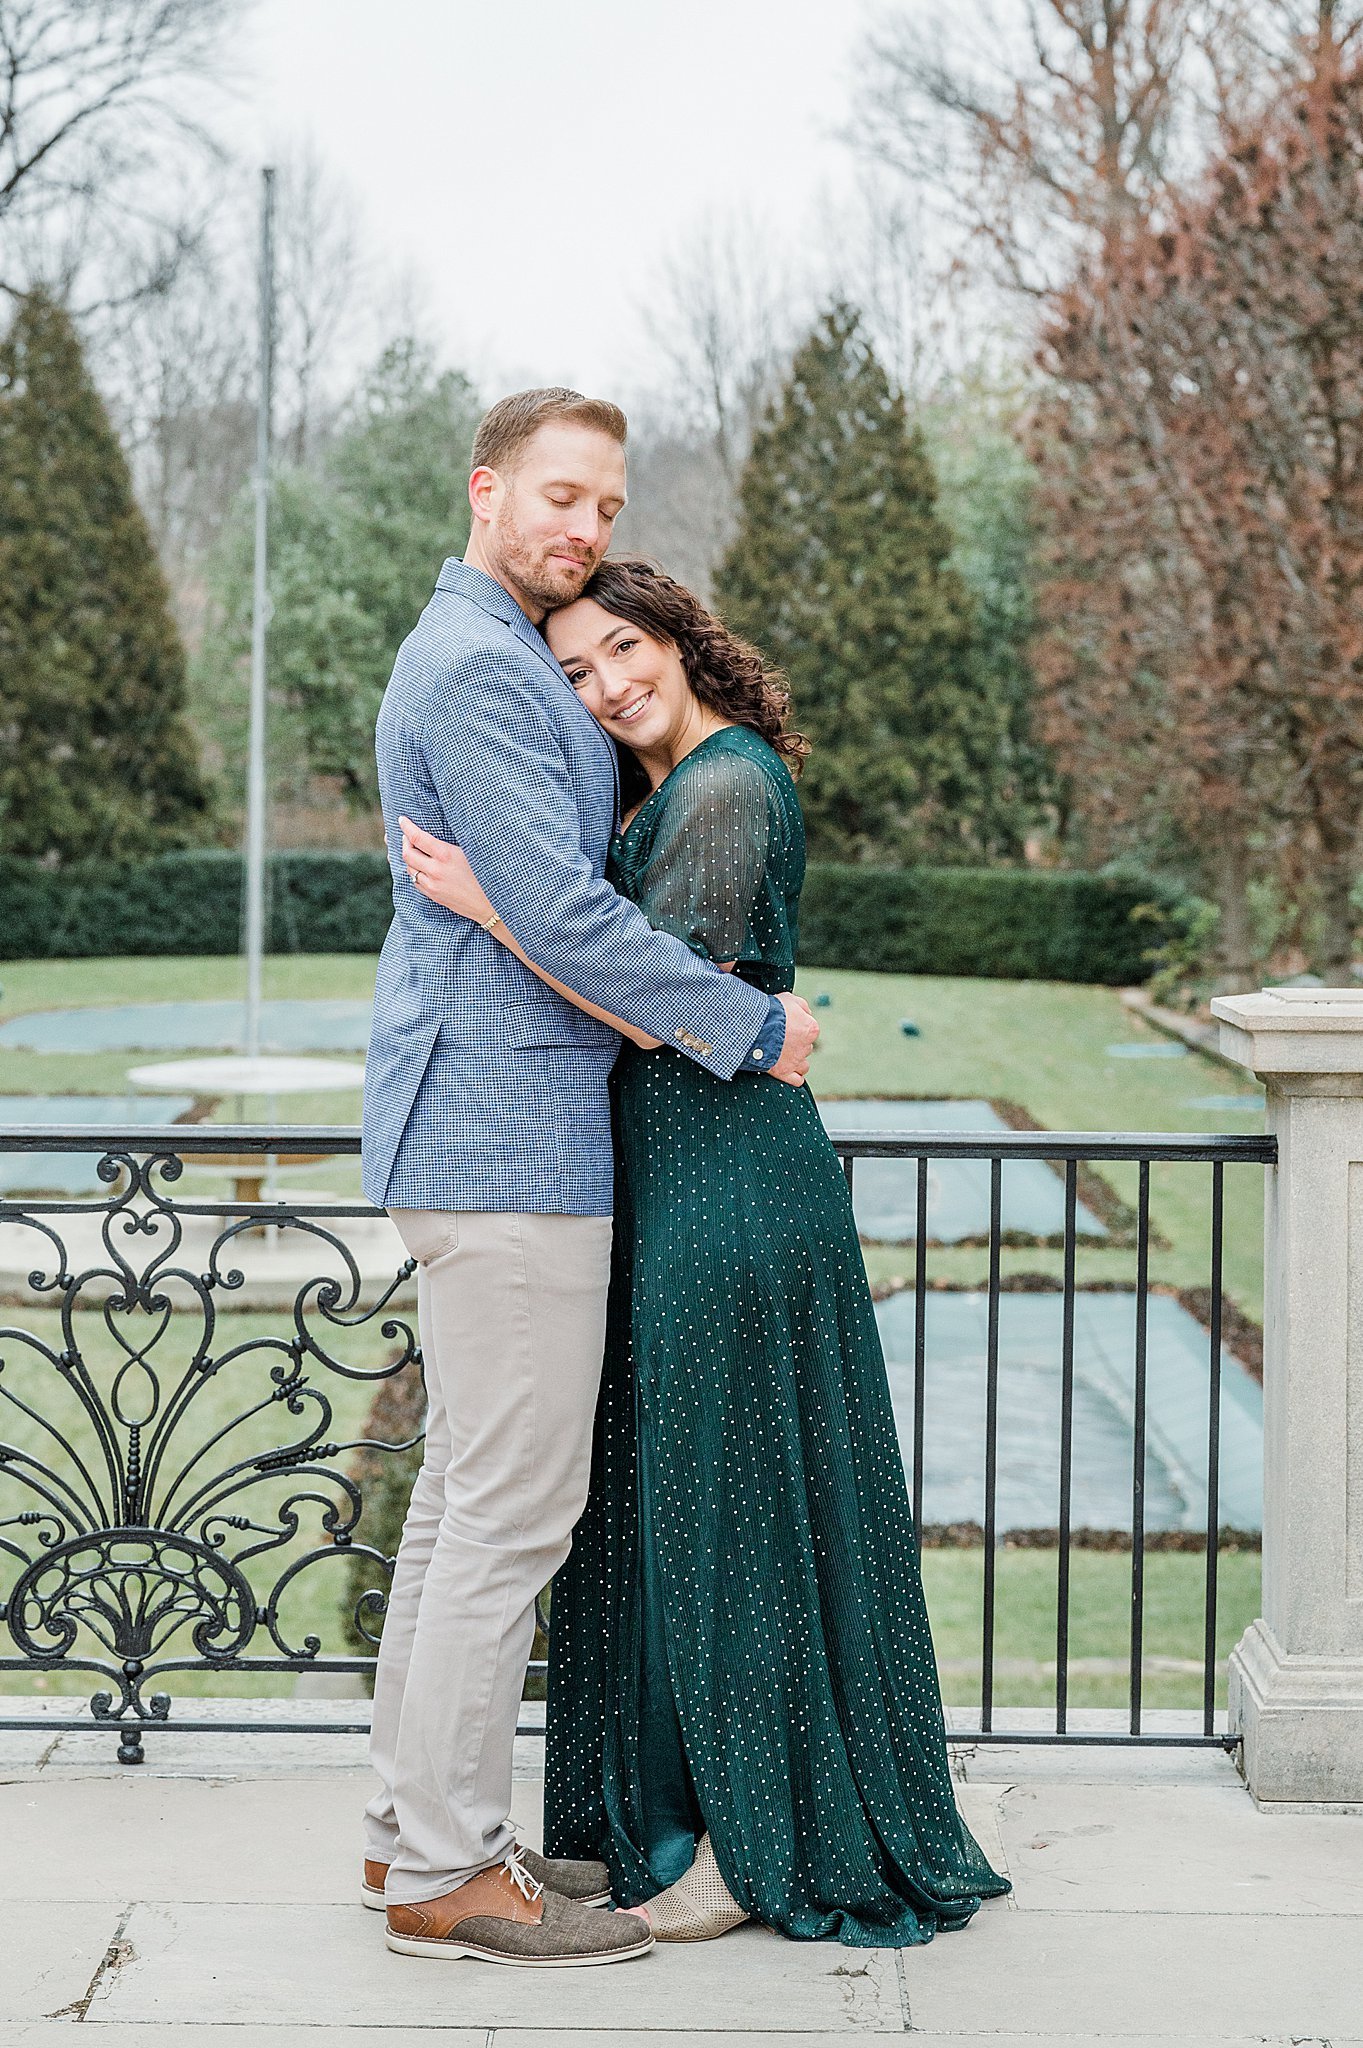 Longwood Gardens Winter Engagement Session Photography Session_4170.jpg